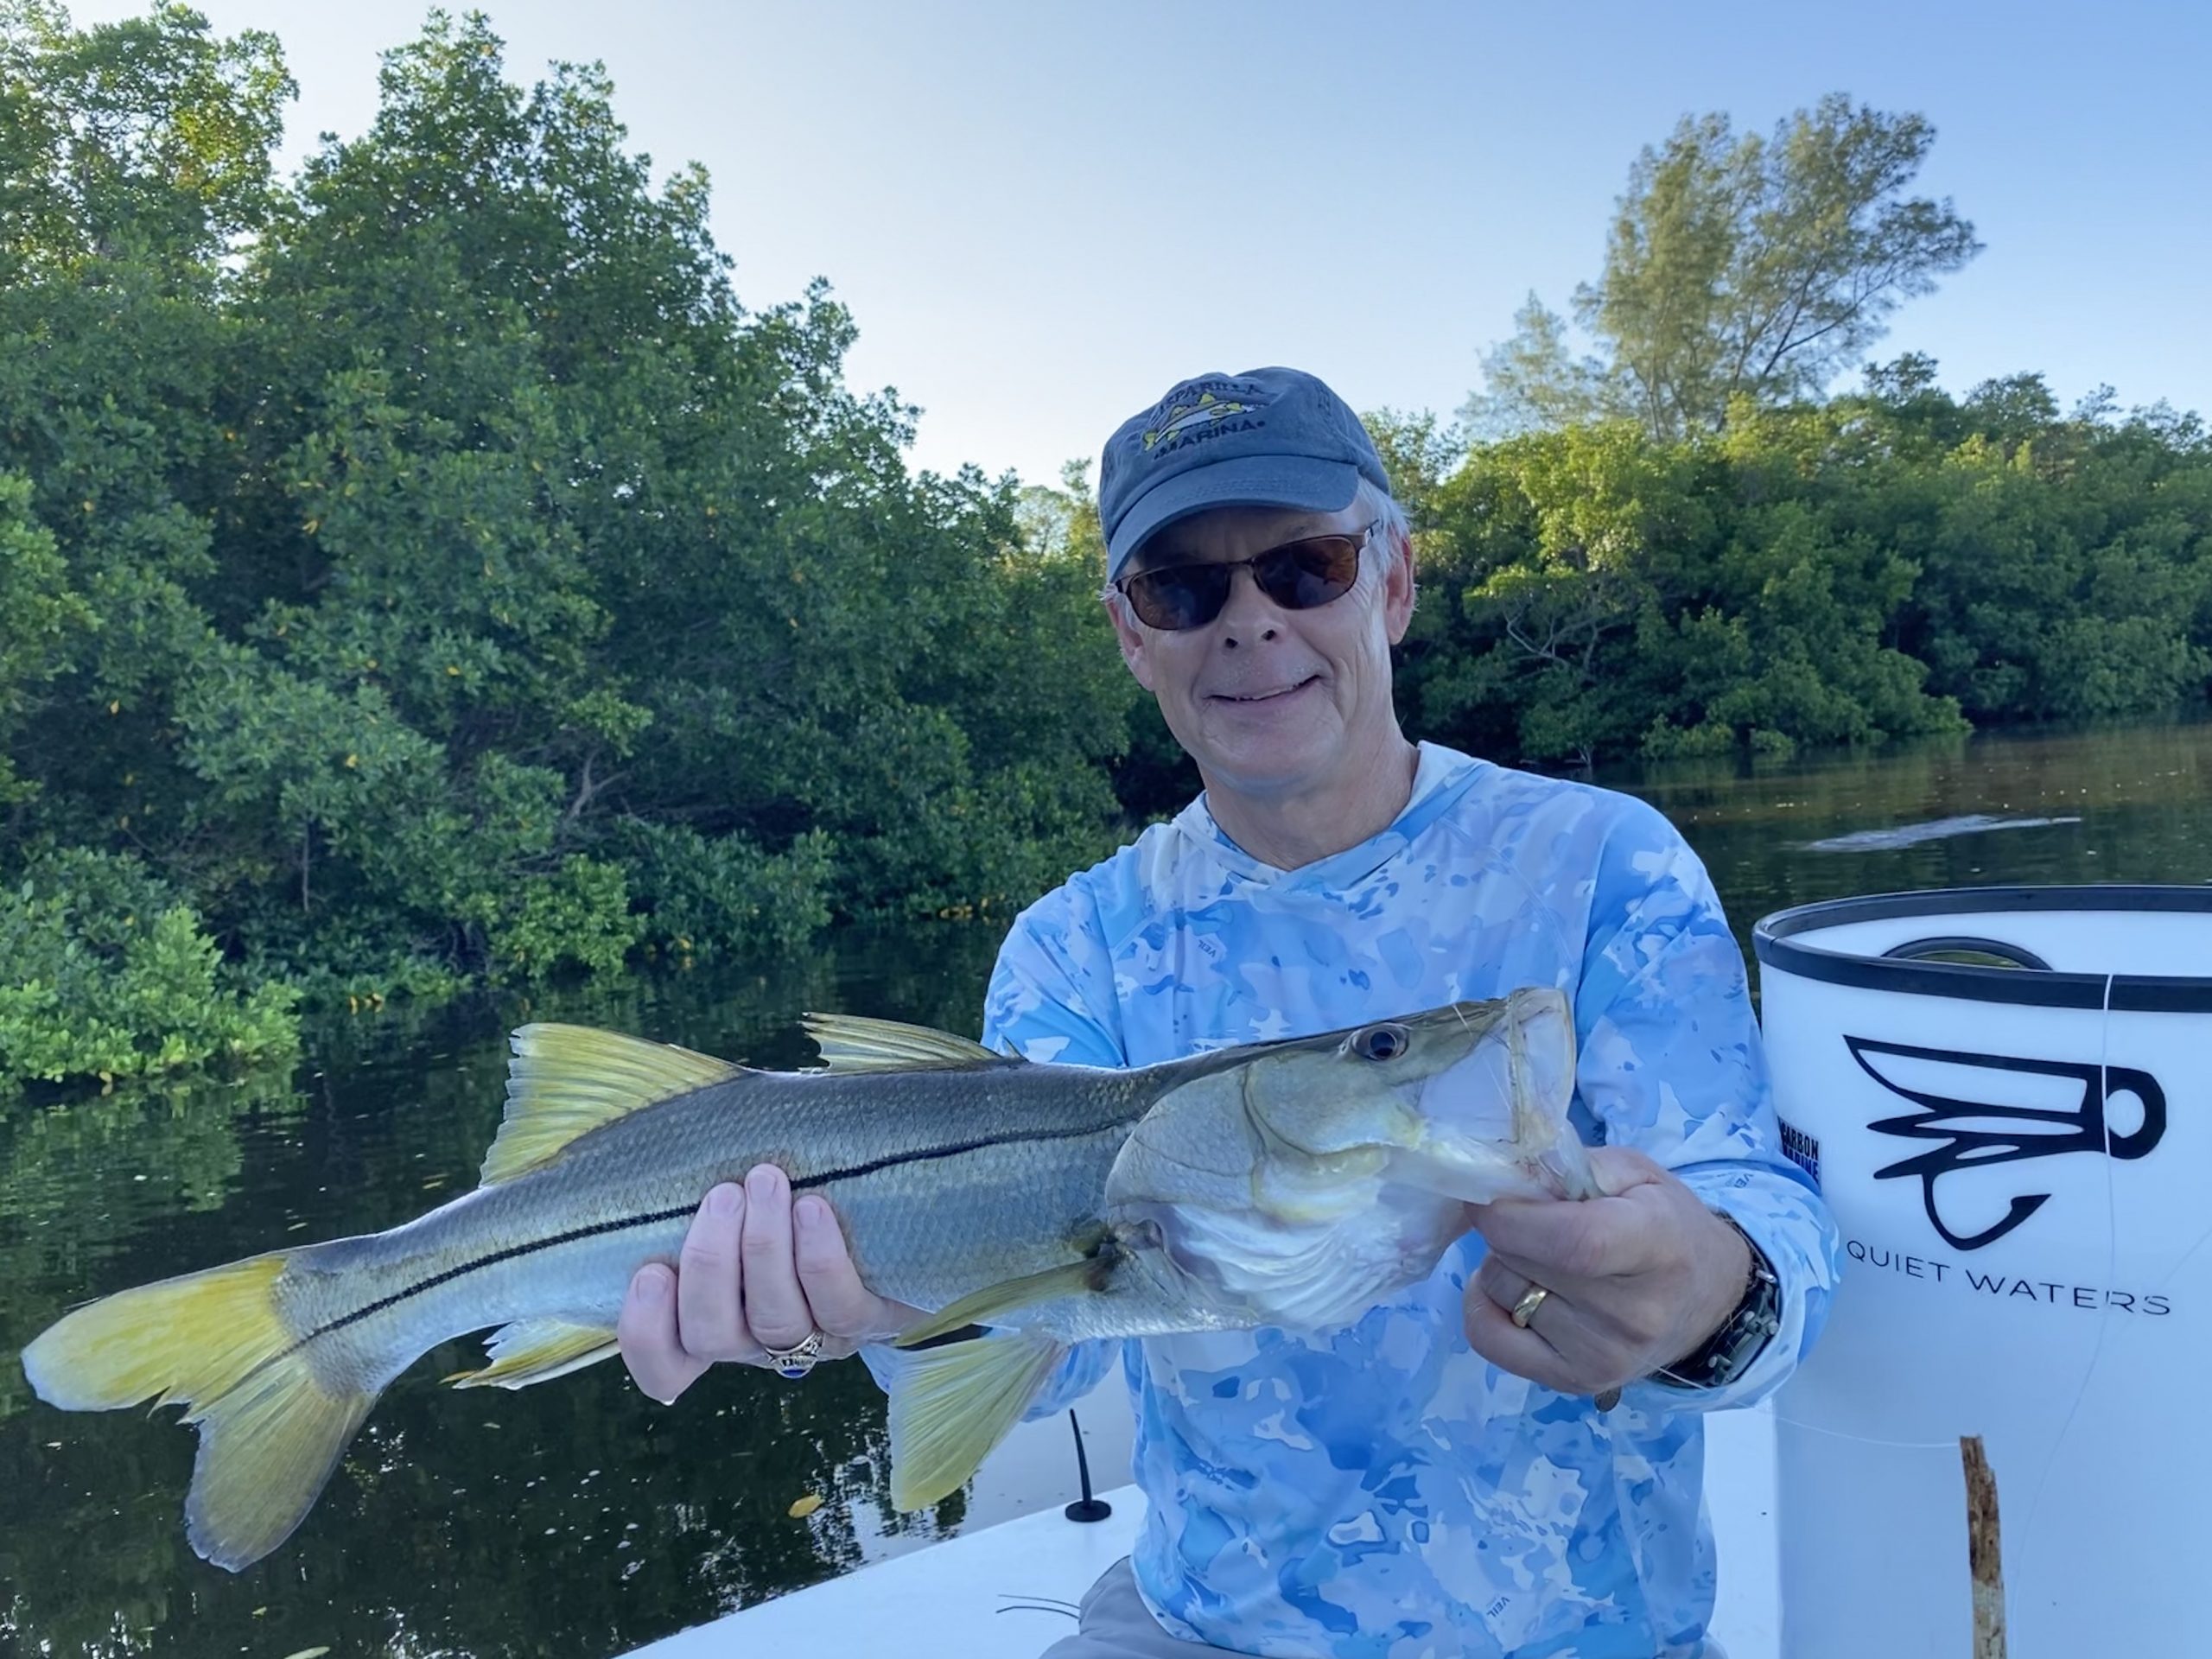 Snook caught by angler